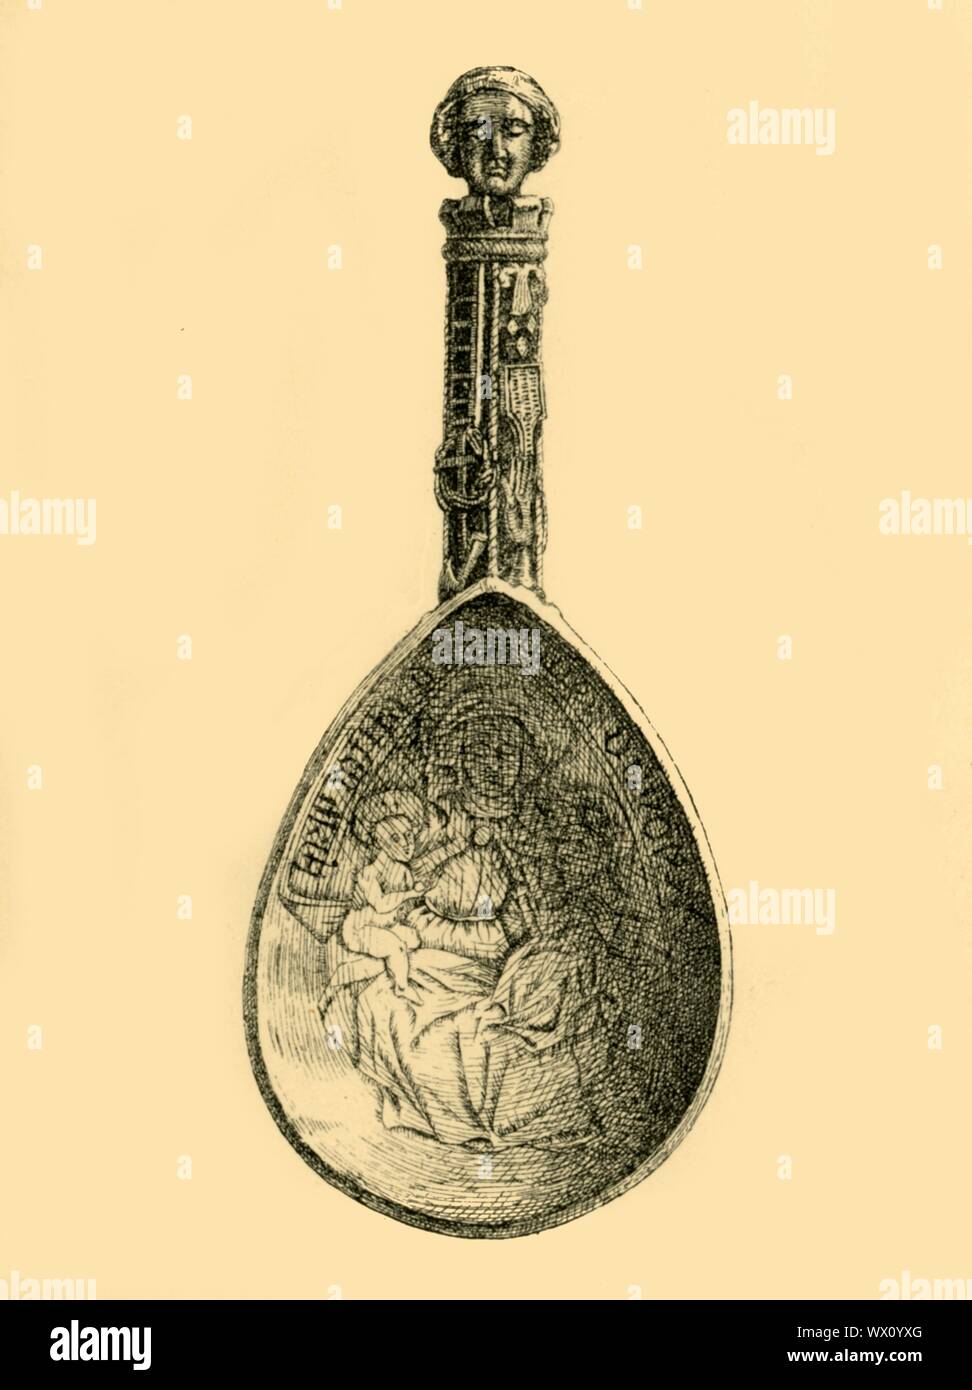 Silver gilt spoon, late 15th century, (1881). Etching of a short-handled spoon made in Denmark, engraved on the bowl with the figures of St Anne, the Virgin Mary and the infant Christ. (The back is inset with an animal tooth, probably intended to be a charm against disease and misfortune). From &quot;The South Kensington Museum&quot;, a book of engraved illustrations, with descriptions, of the works of art in the collection of the Victoria &amp; Albert Museum in London (formerly known as the South Kensington Museum). [Sampson Low, Marston, Searle and Rivington, London, 1881] Stock Photo